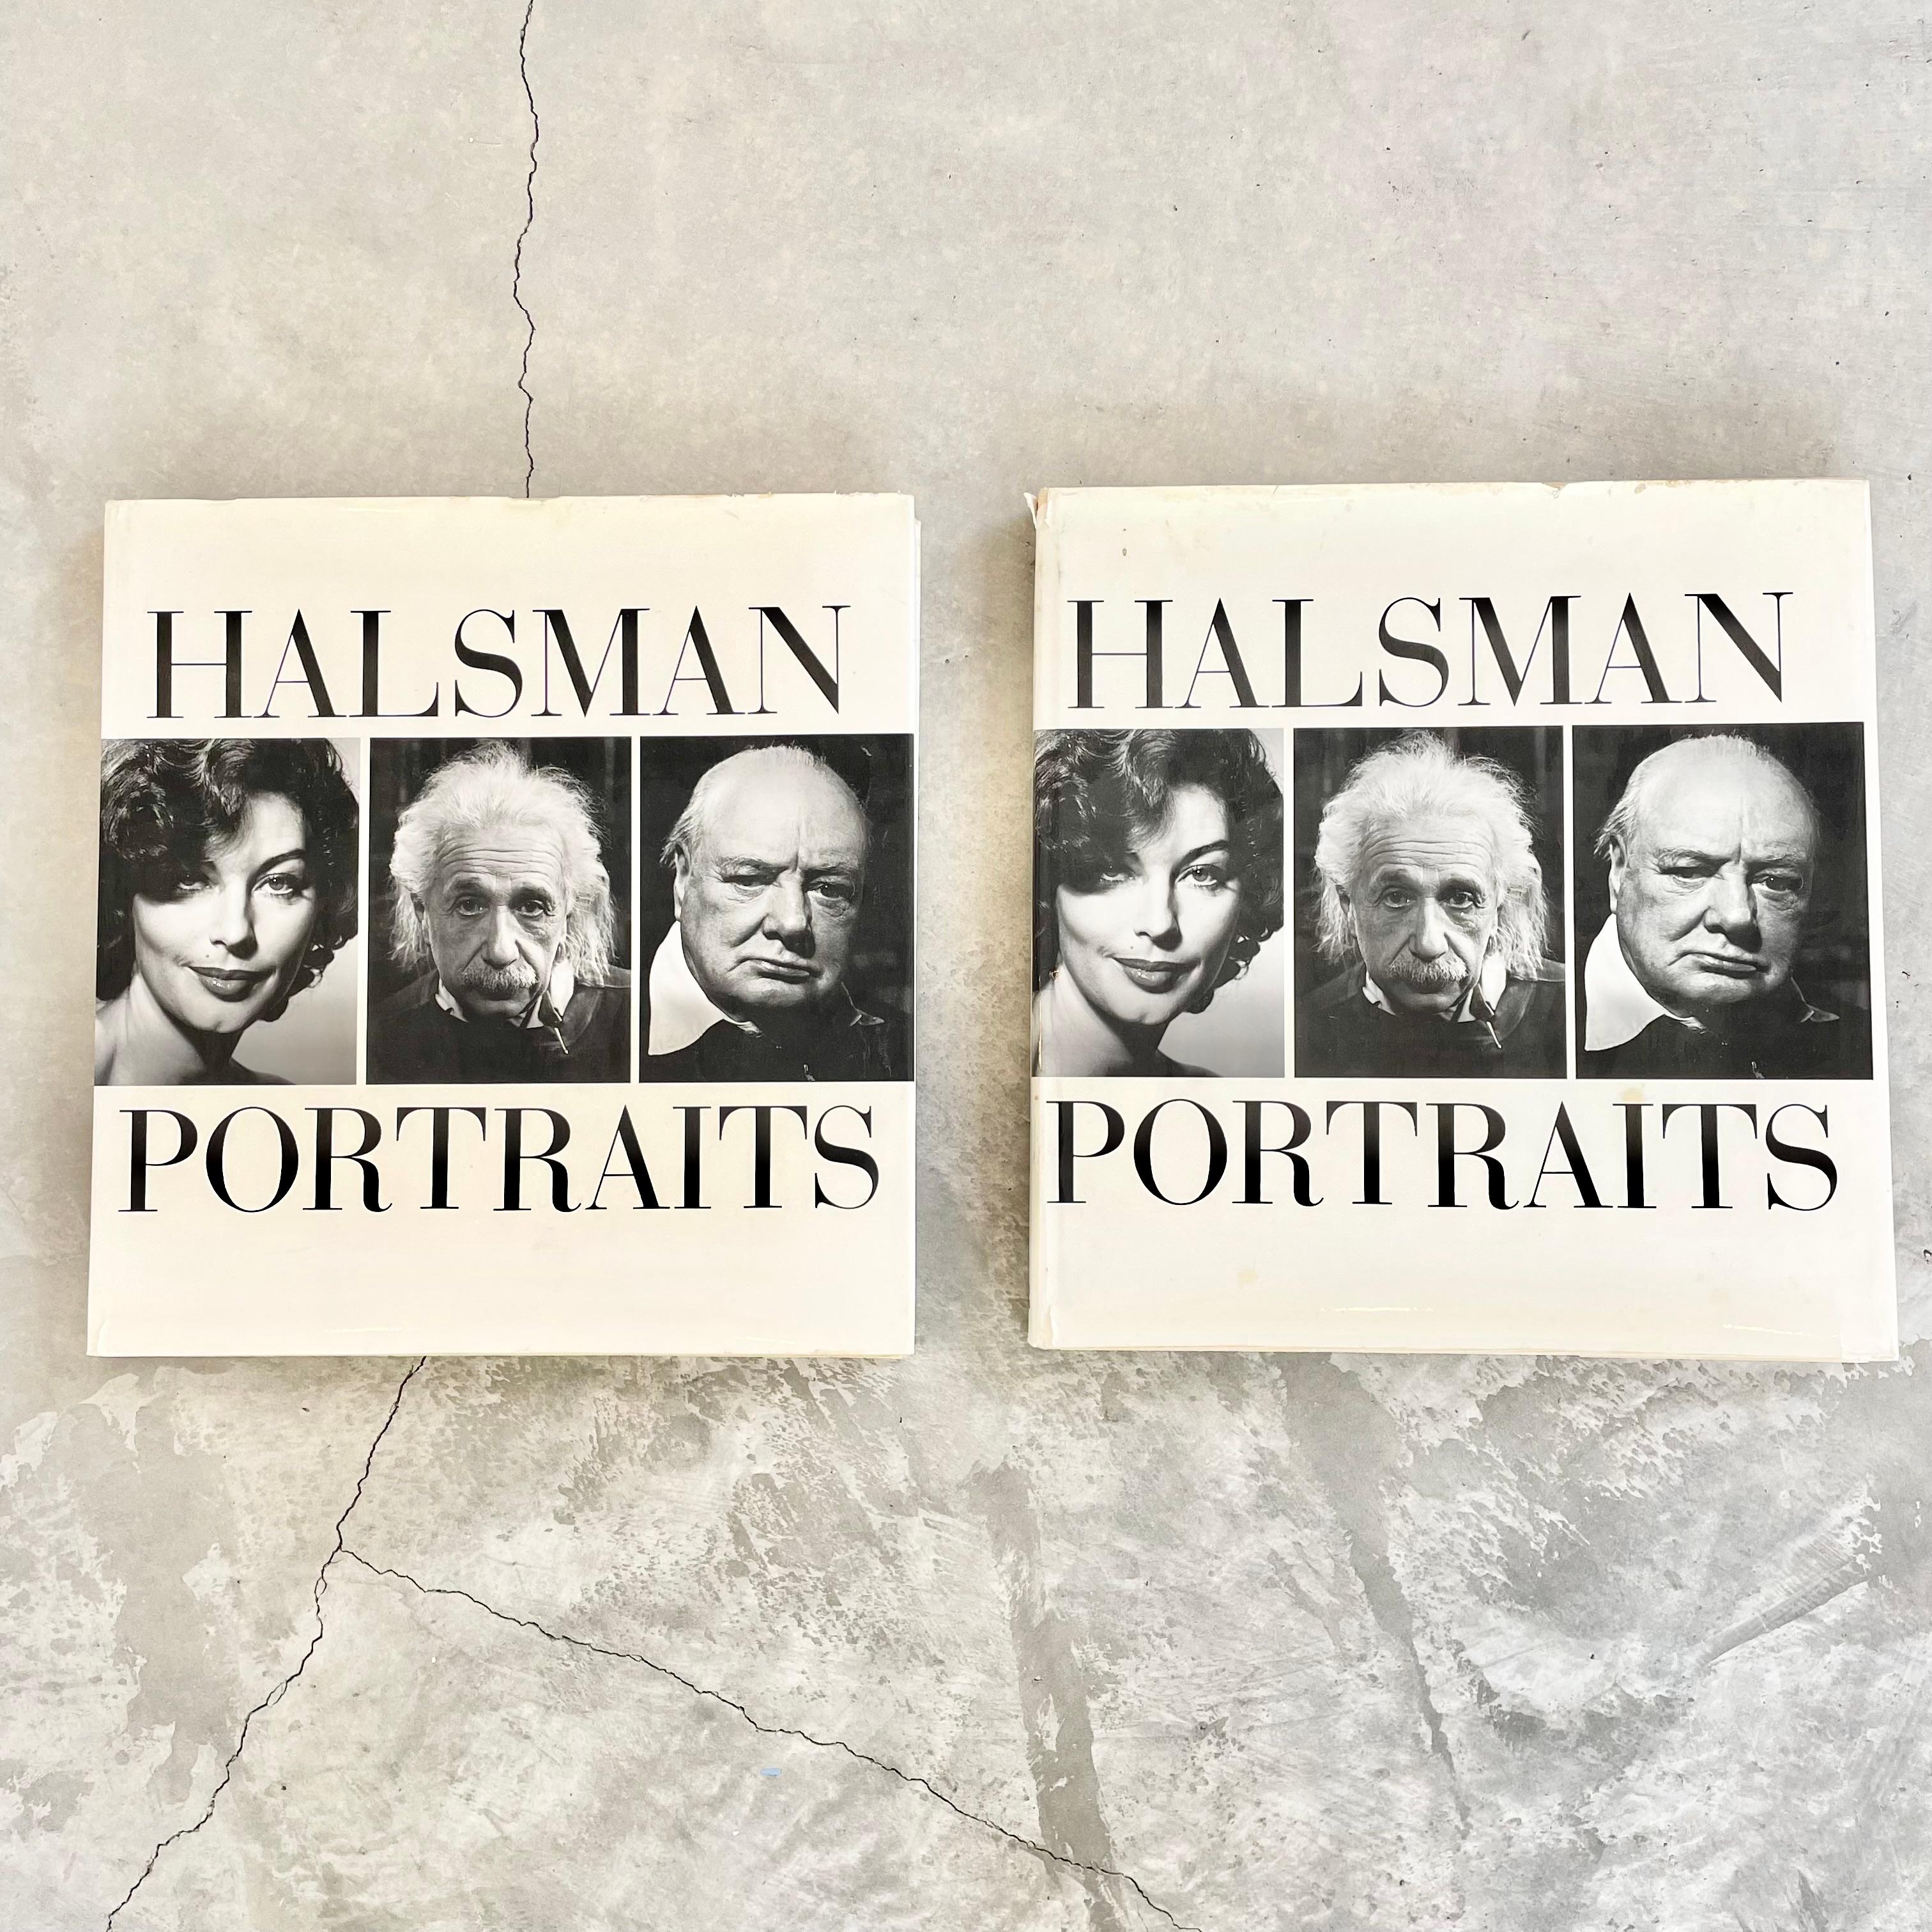 Paper Portraits by Halsman Hardcover Book, 1983 For Sale